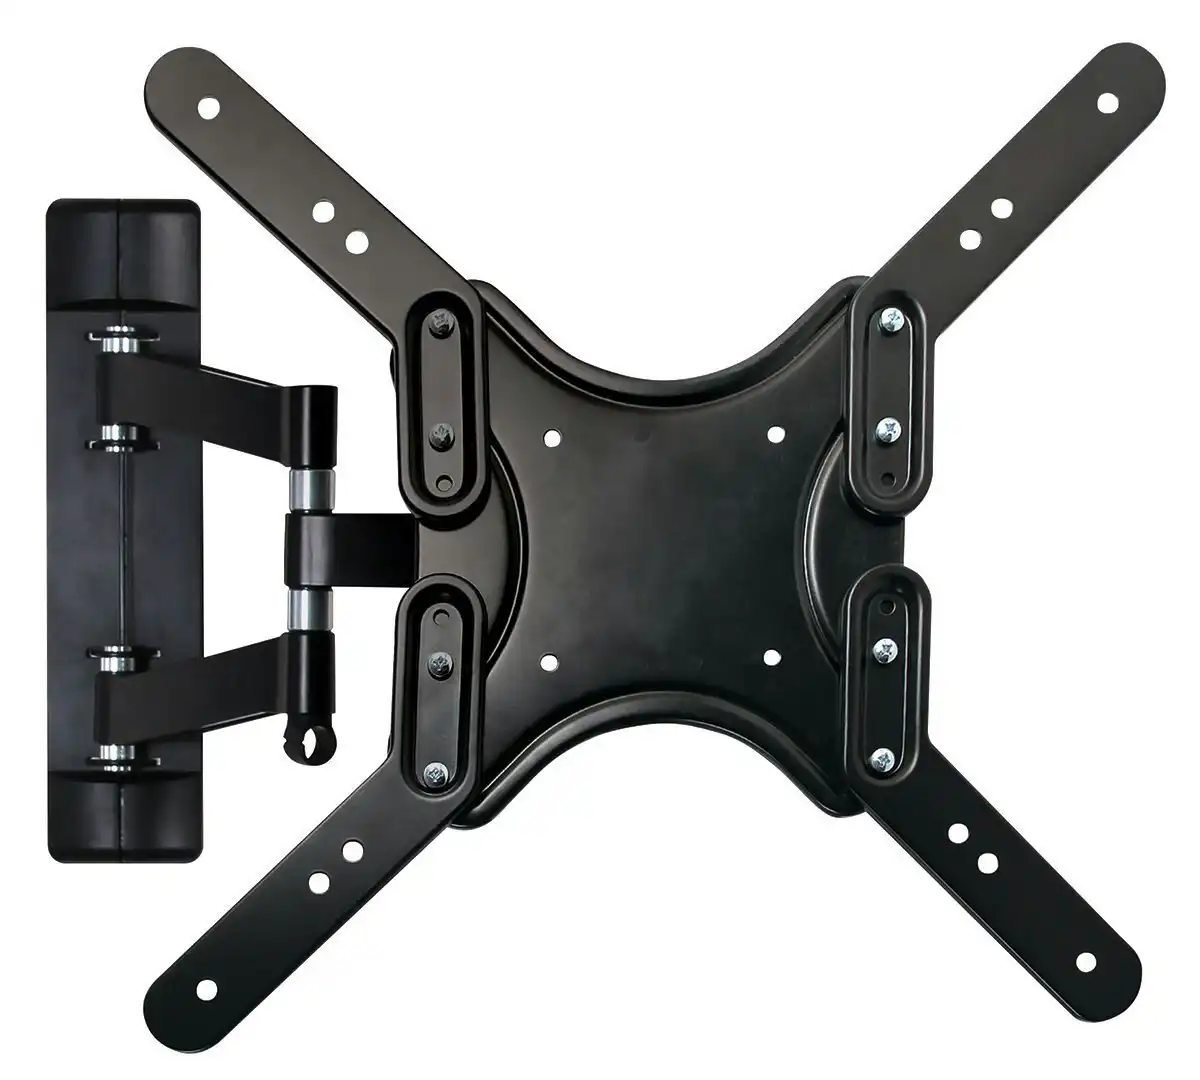 Crest Full-Motion TV Wall Mount for 25 to 55 Inch TVs